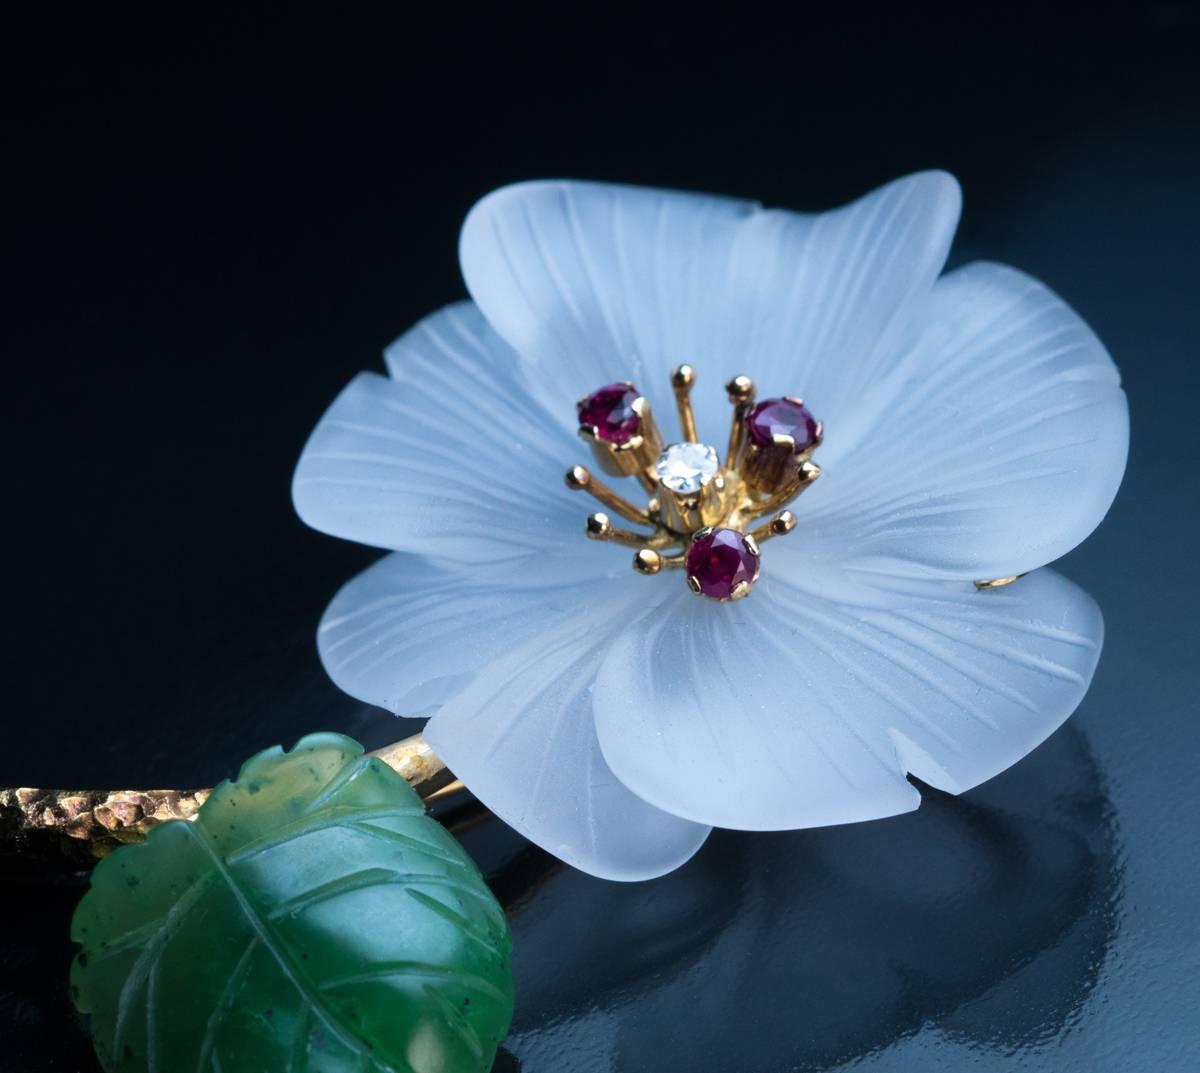 Made in Vienna, Austria in the 1950s

A superbly carved frosted rock crystal flower with a carved nephrite jade leaf is mounted on a textured 14K gold stem.  The flowerhead is embellished with three rubies and a diamond.

Marked with 585 gold